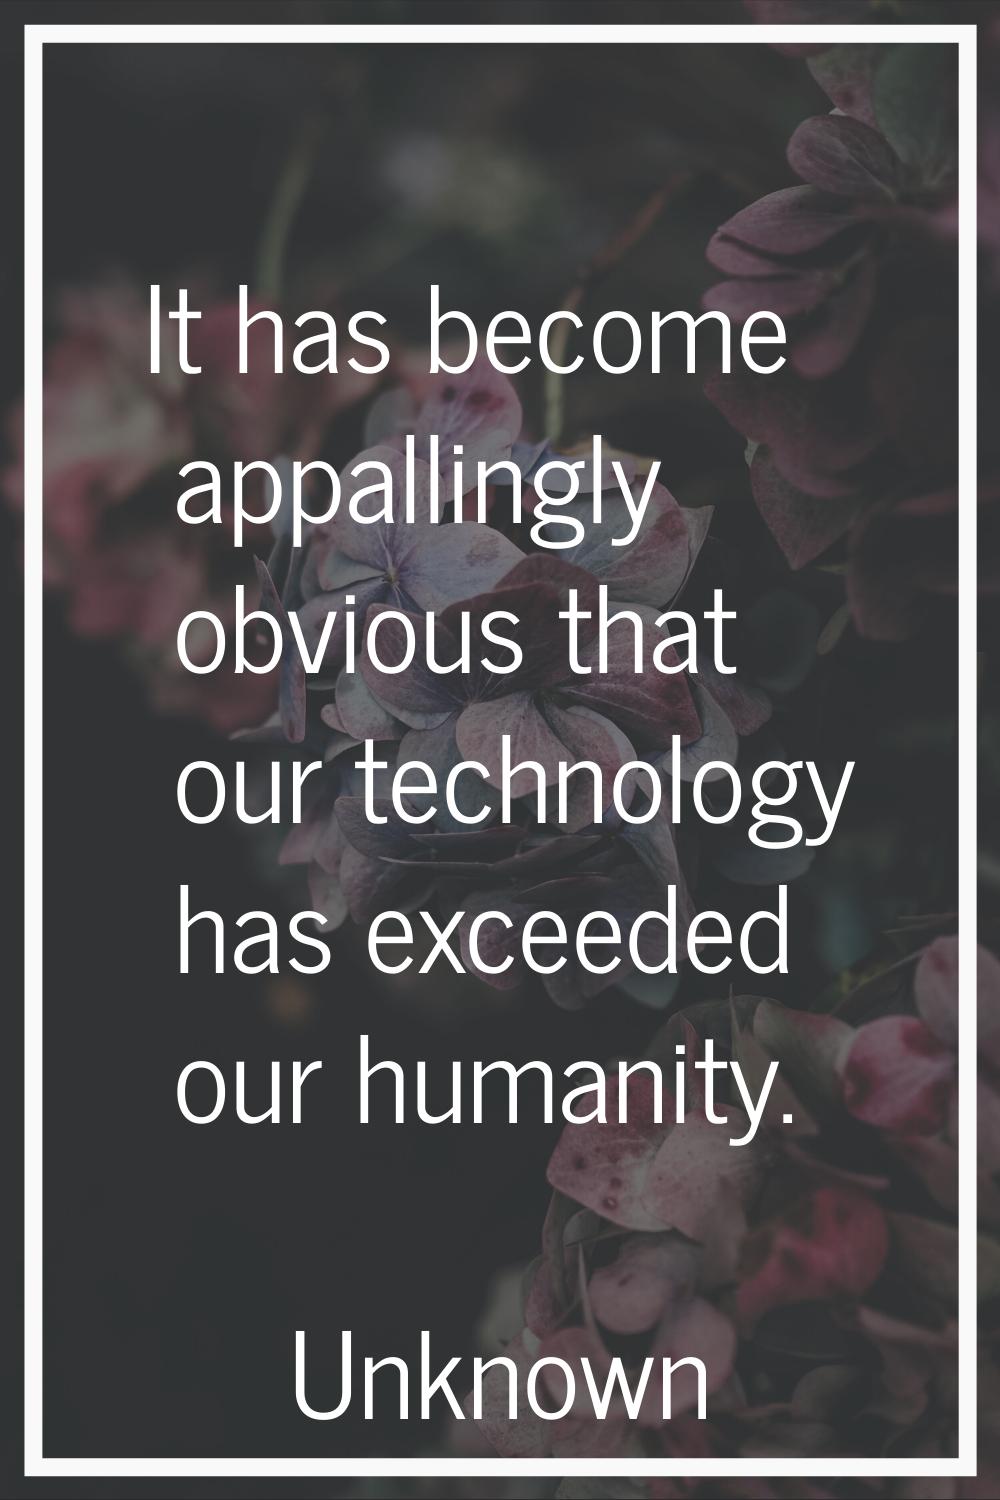 It has become appallingly obvious that our technology has exceeded our humanity.